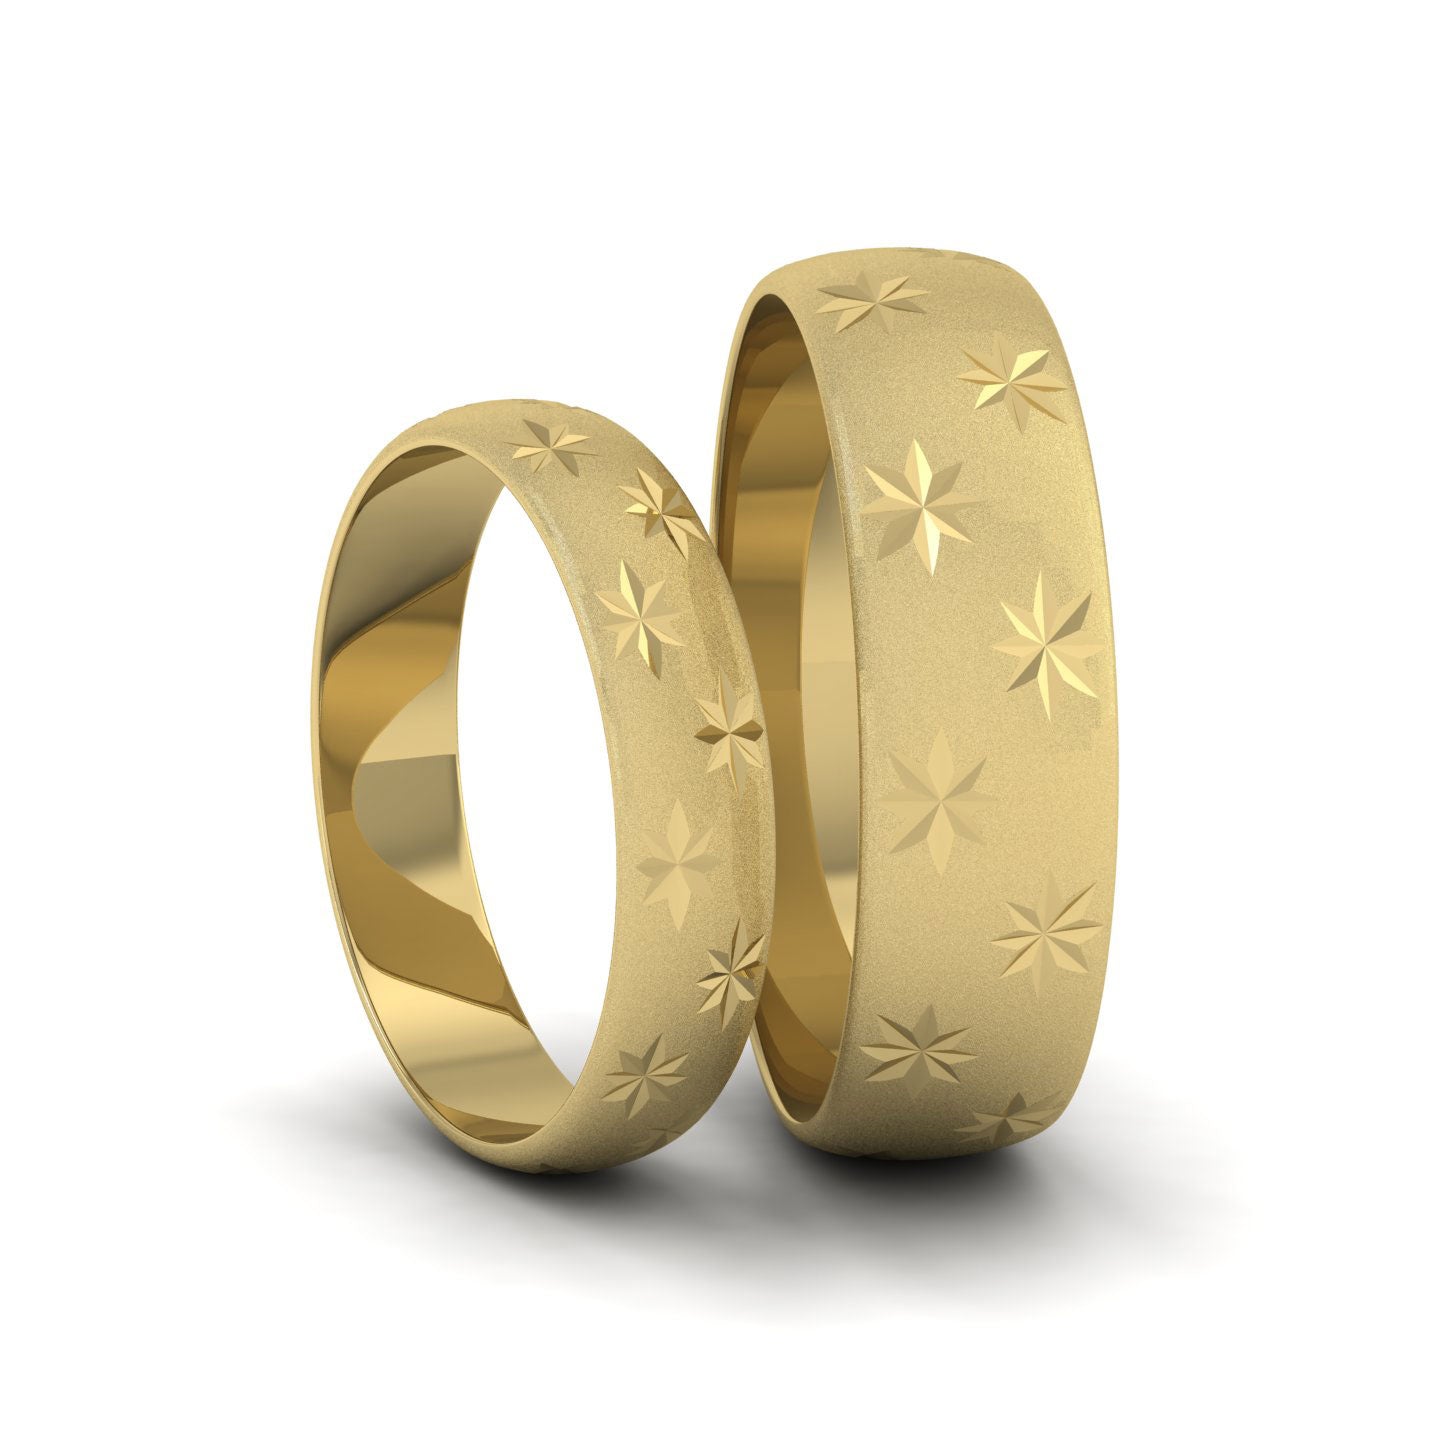 Star Patterned 14ct Yellow Gold 4mm Wedding Ring